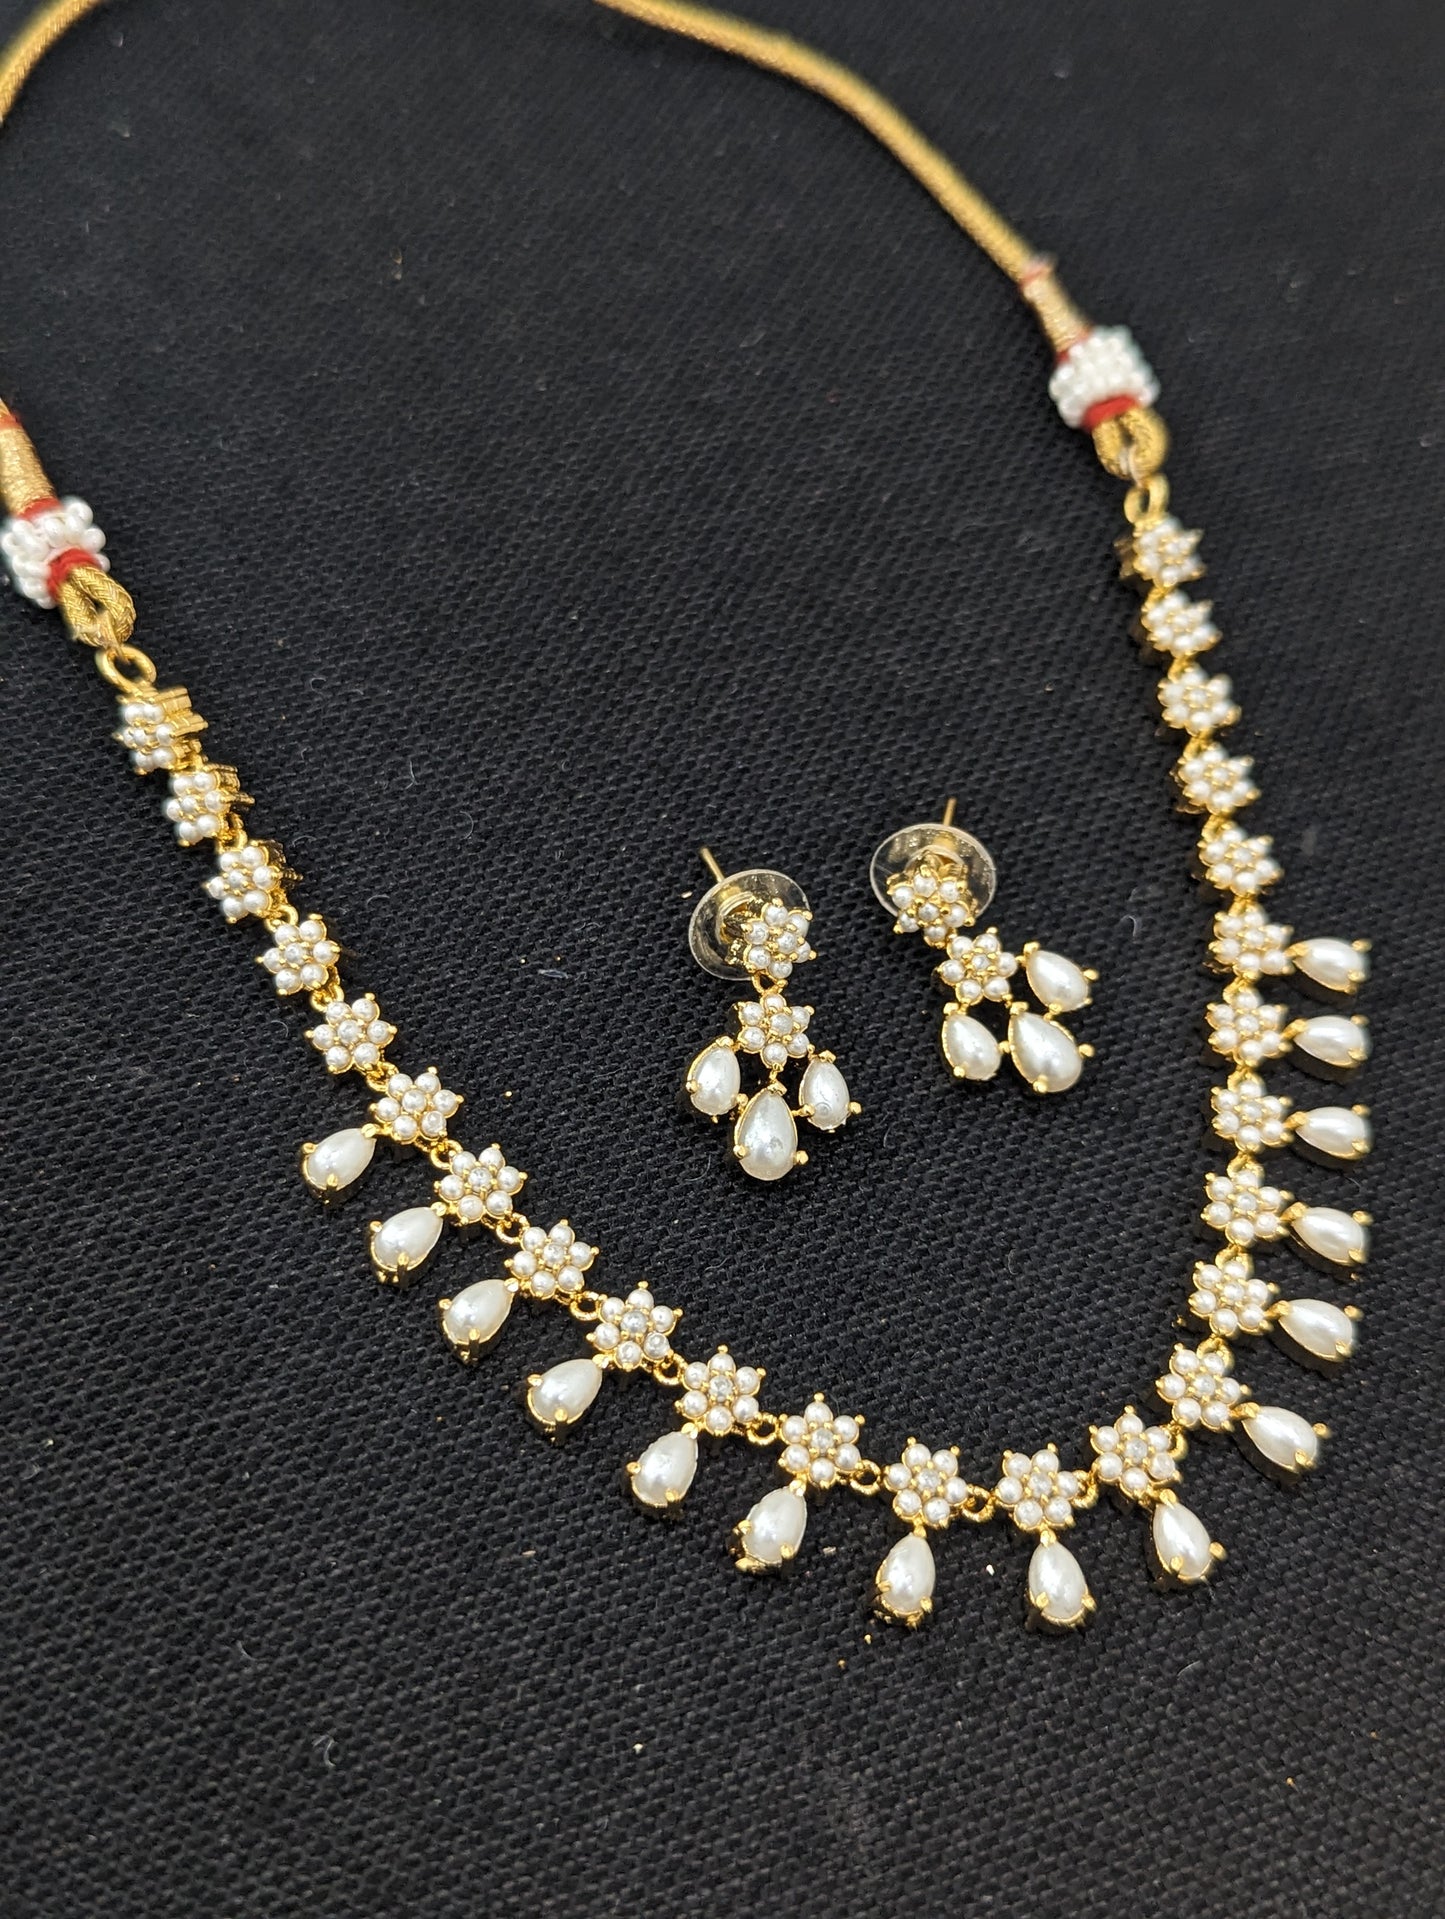 CZ Faux Pearl choker necklace and Earrings set